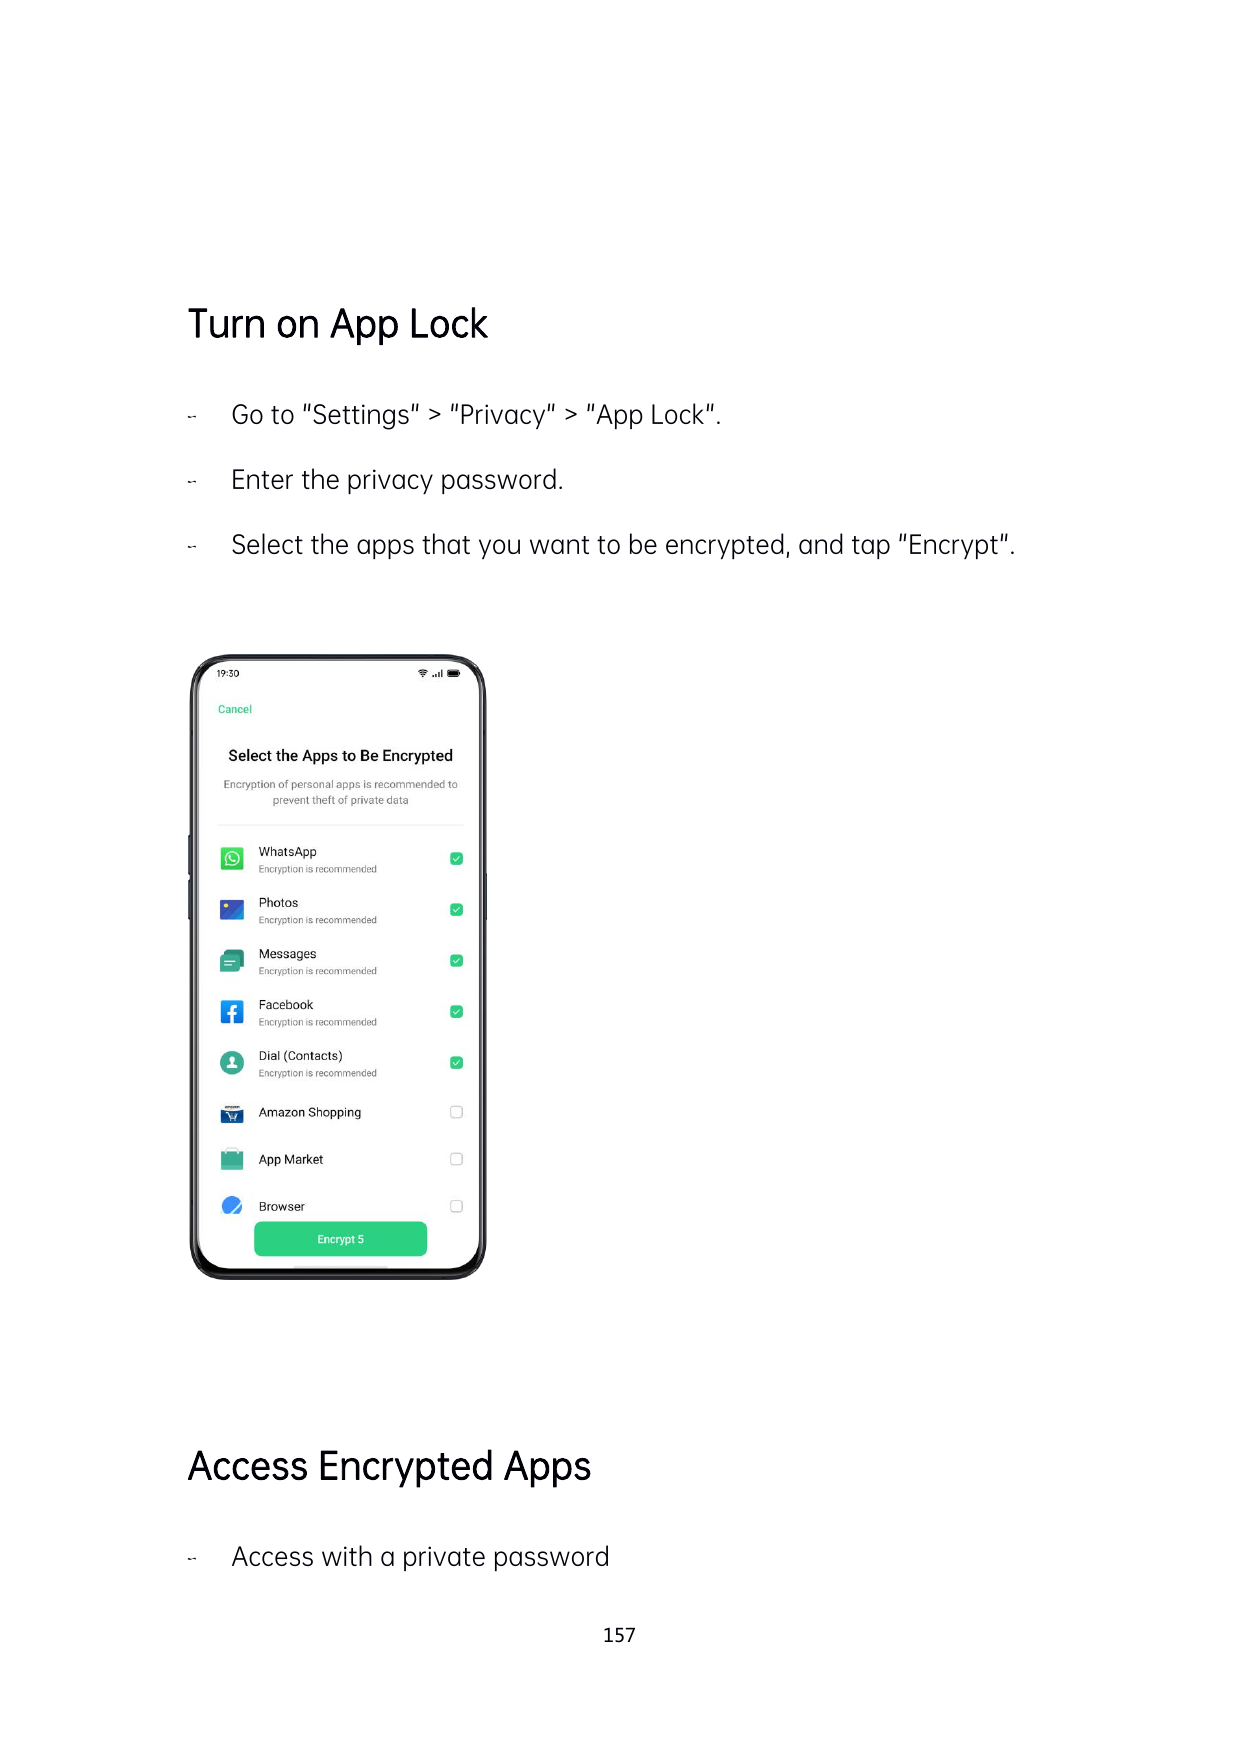 Turn on App LockGo to "Settings" > "Privacy" > "App Lock".Enter the privacy password.Select the apps that you want to be encr